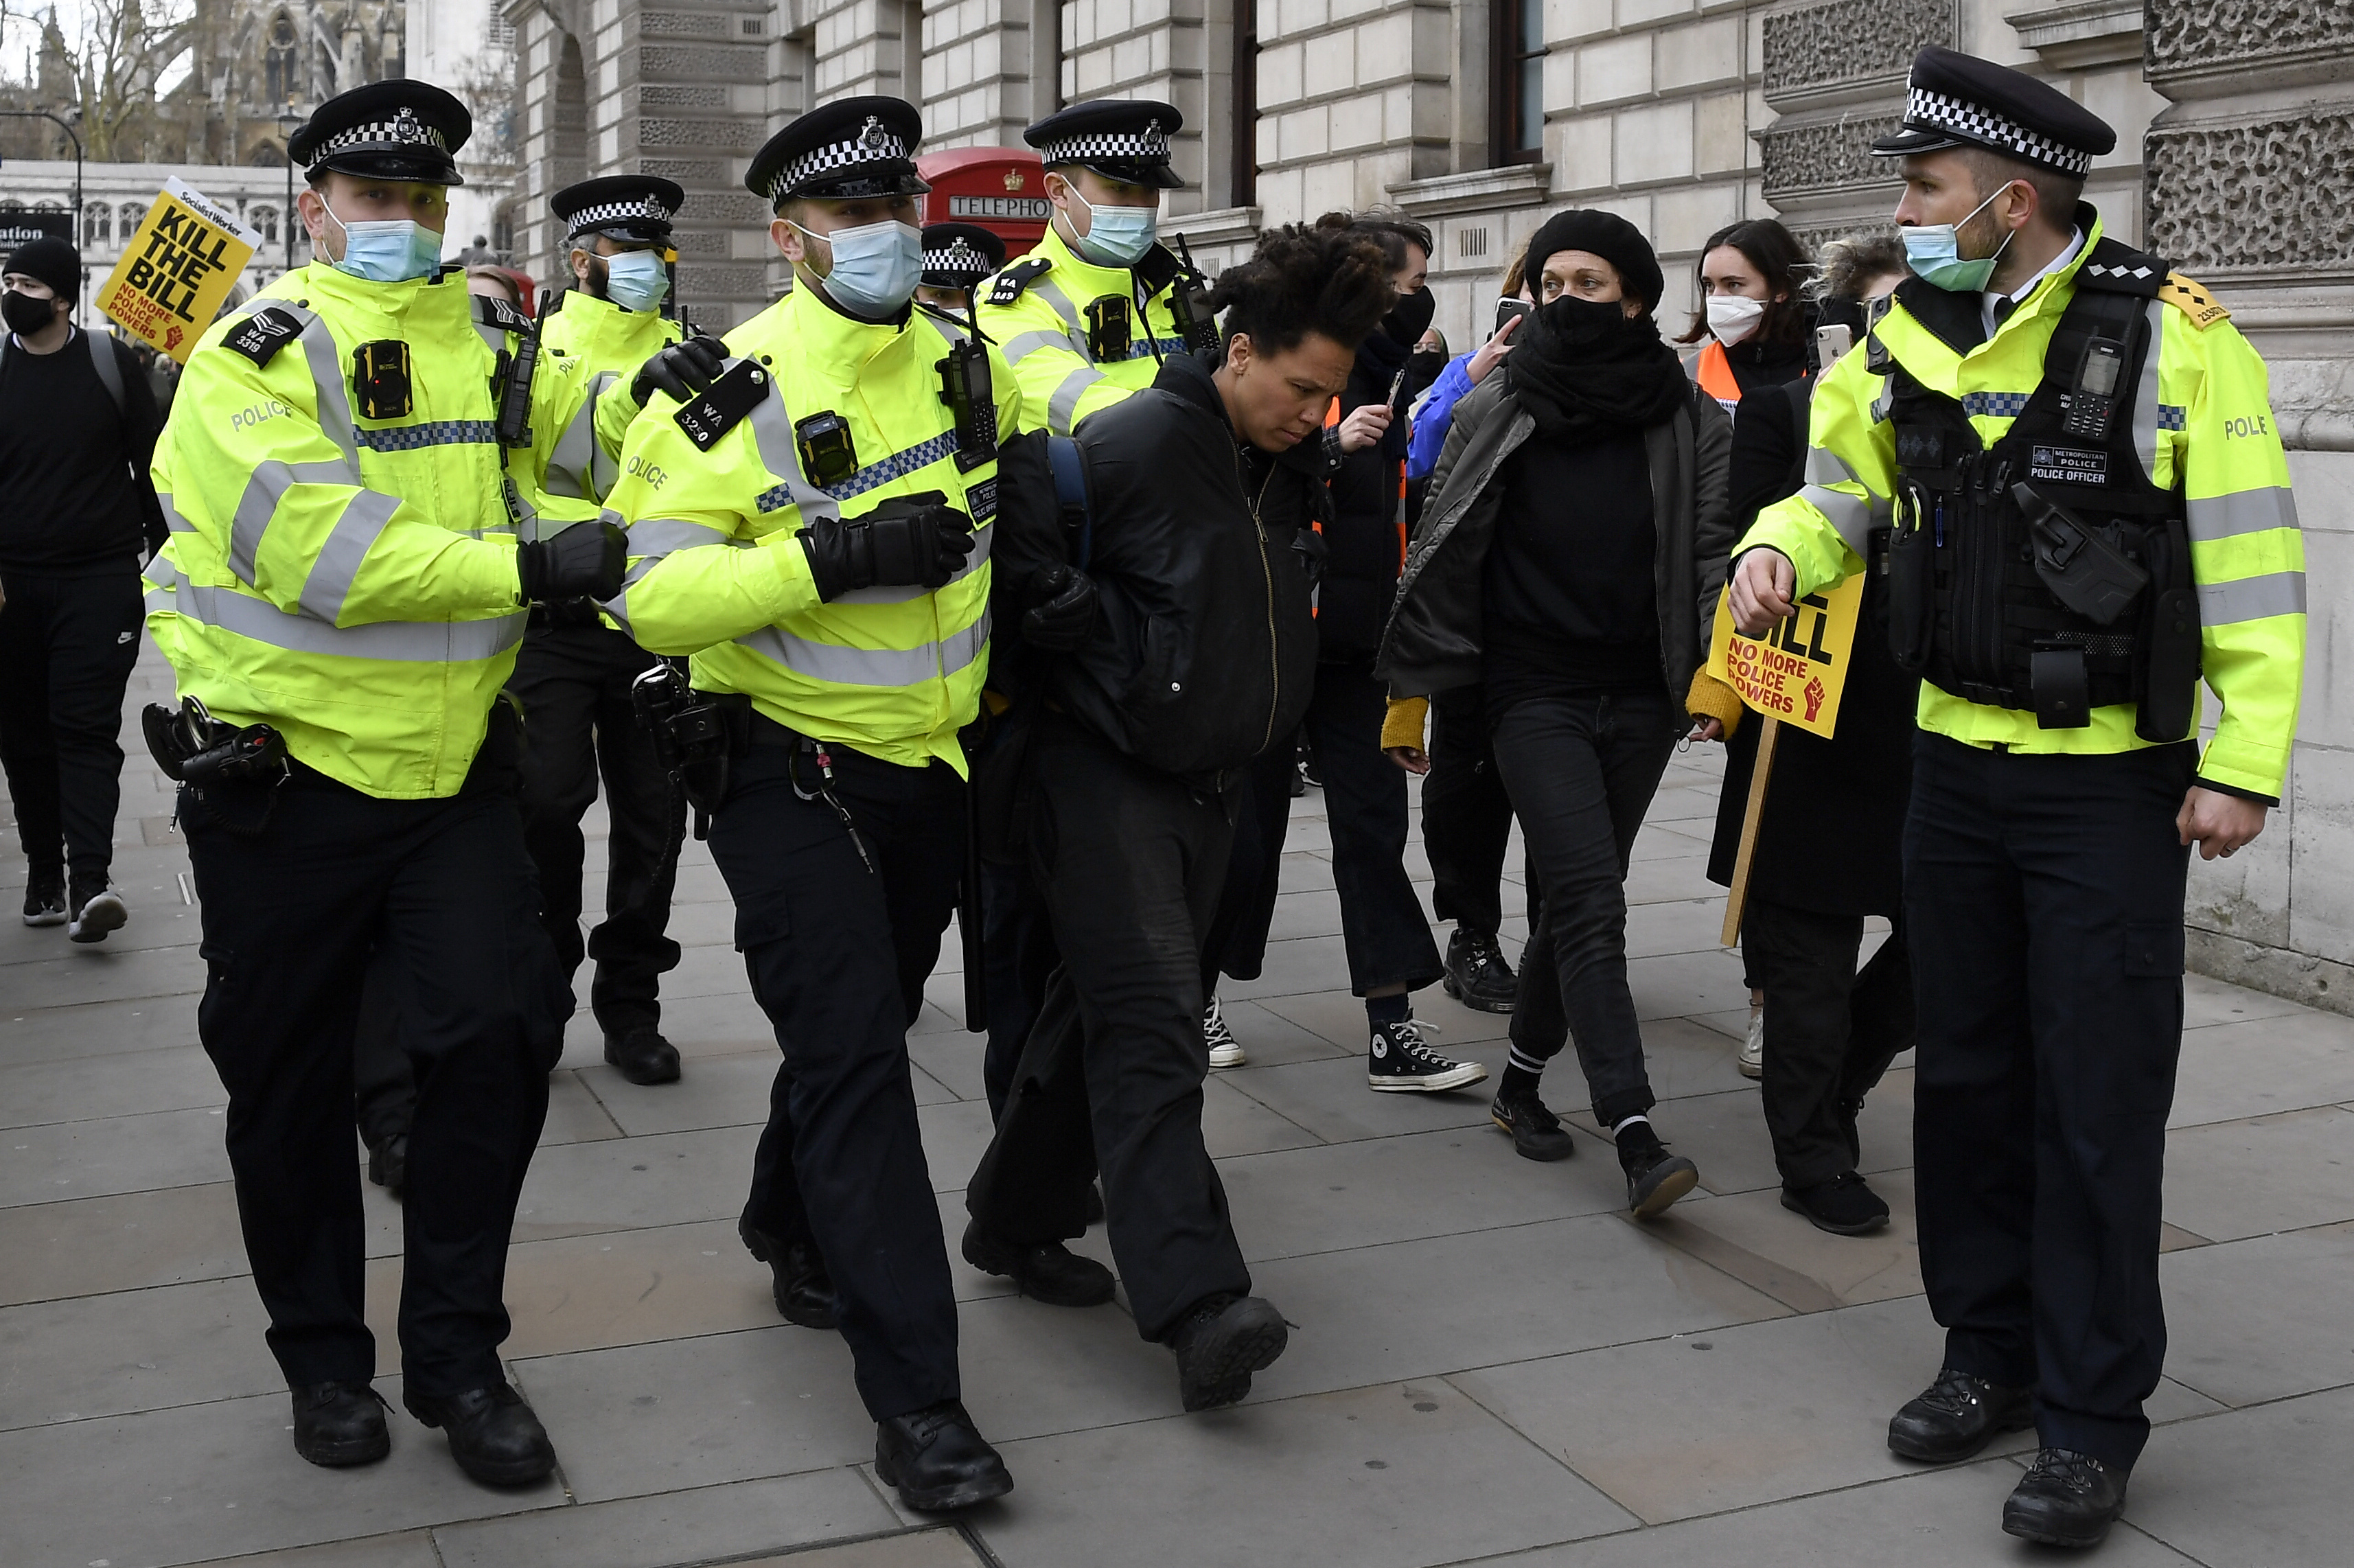 Police detain a man for blocking traffic at Parliament Square during a 'Kill the Bill' protest in London, U.K. on April 3, 2021. (Alberto Pezzali—AP)